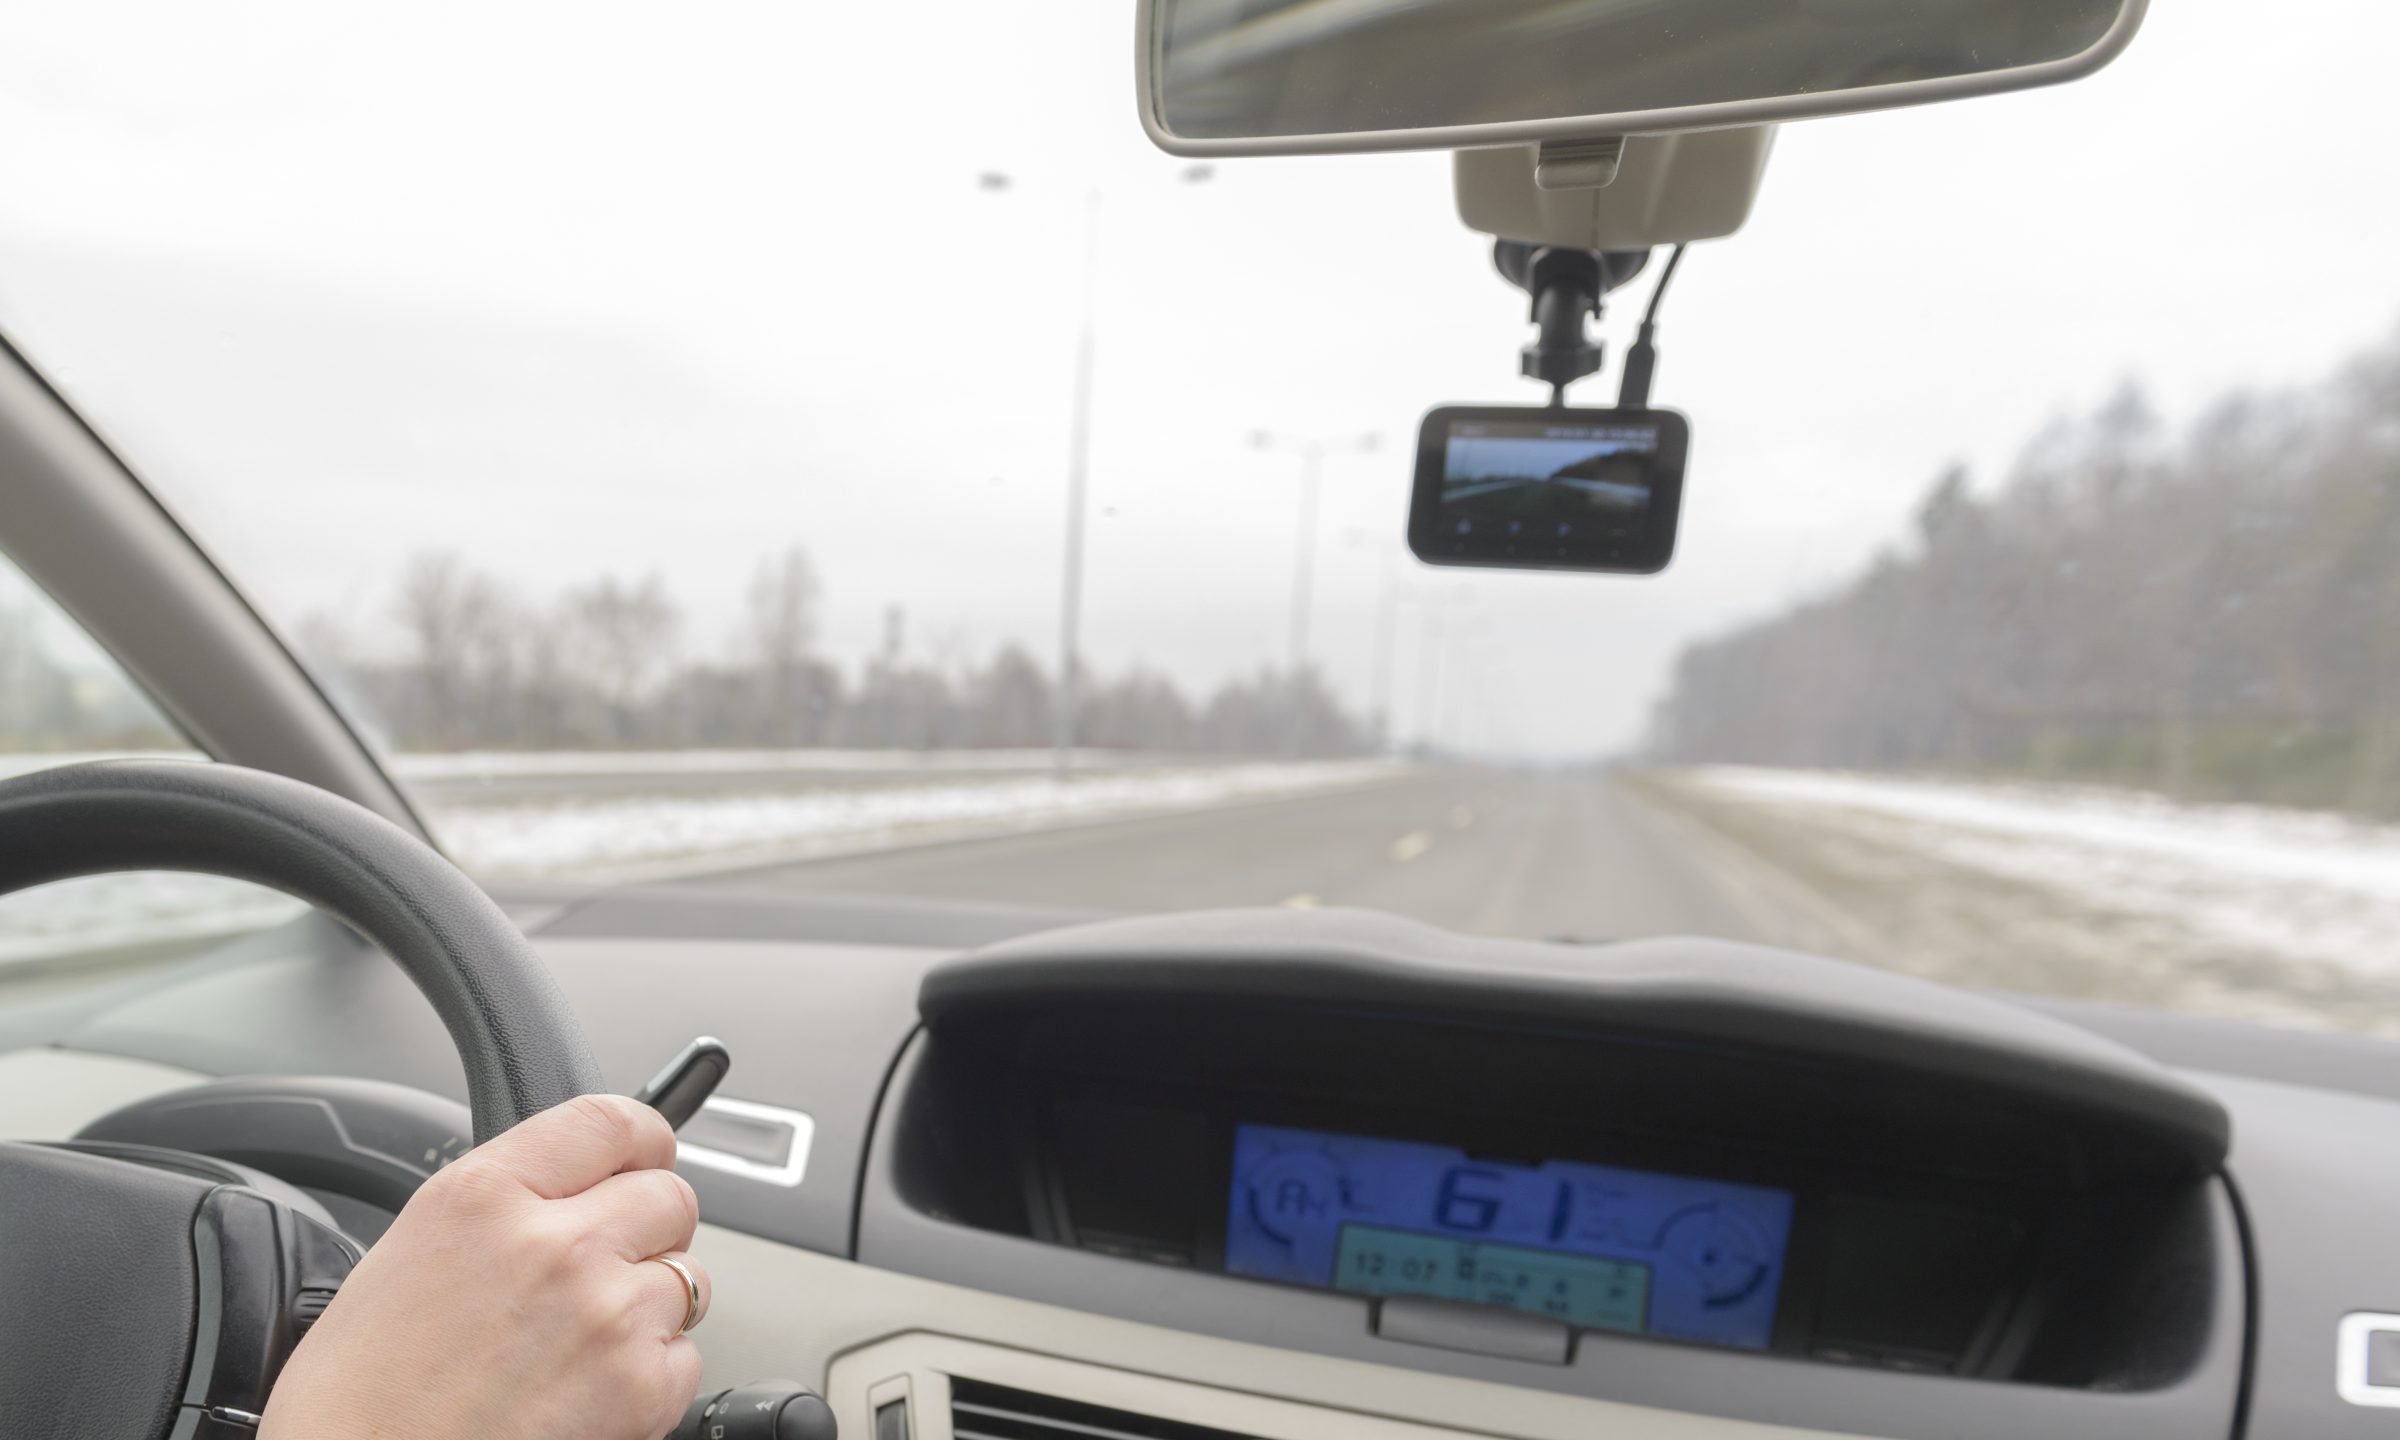 How to install a dash cam in your car at home: Step-by-step guide